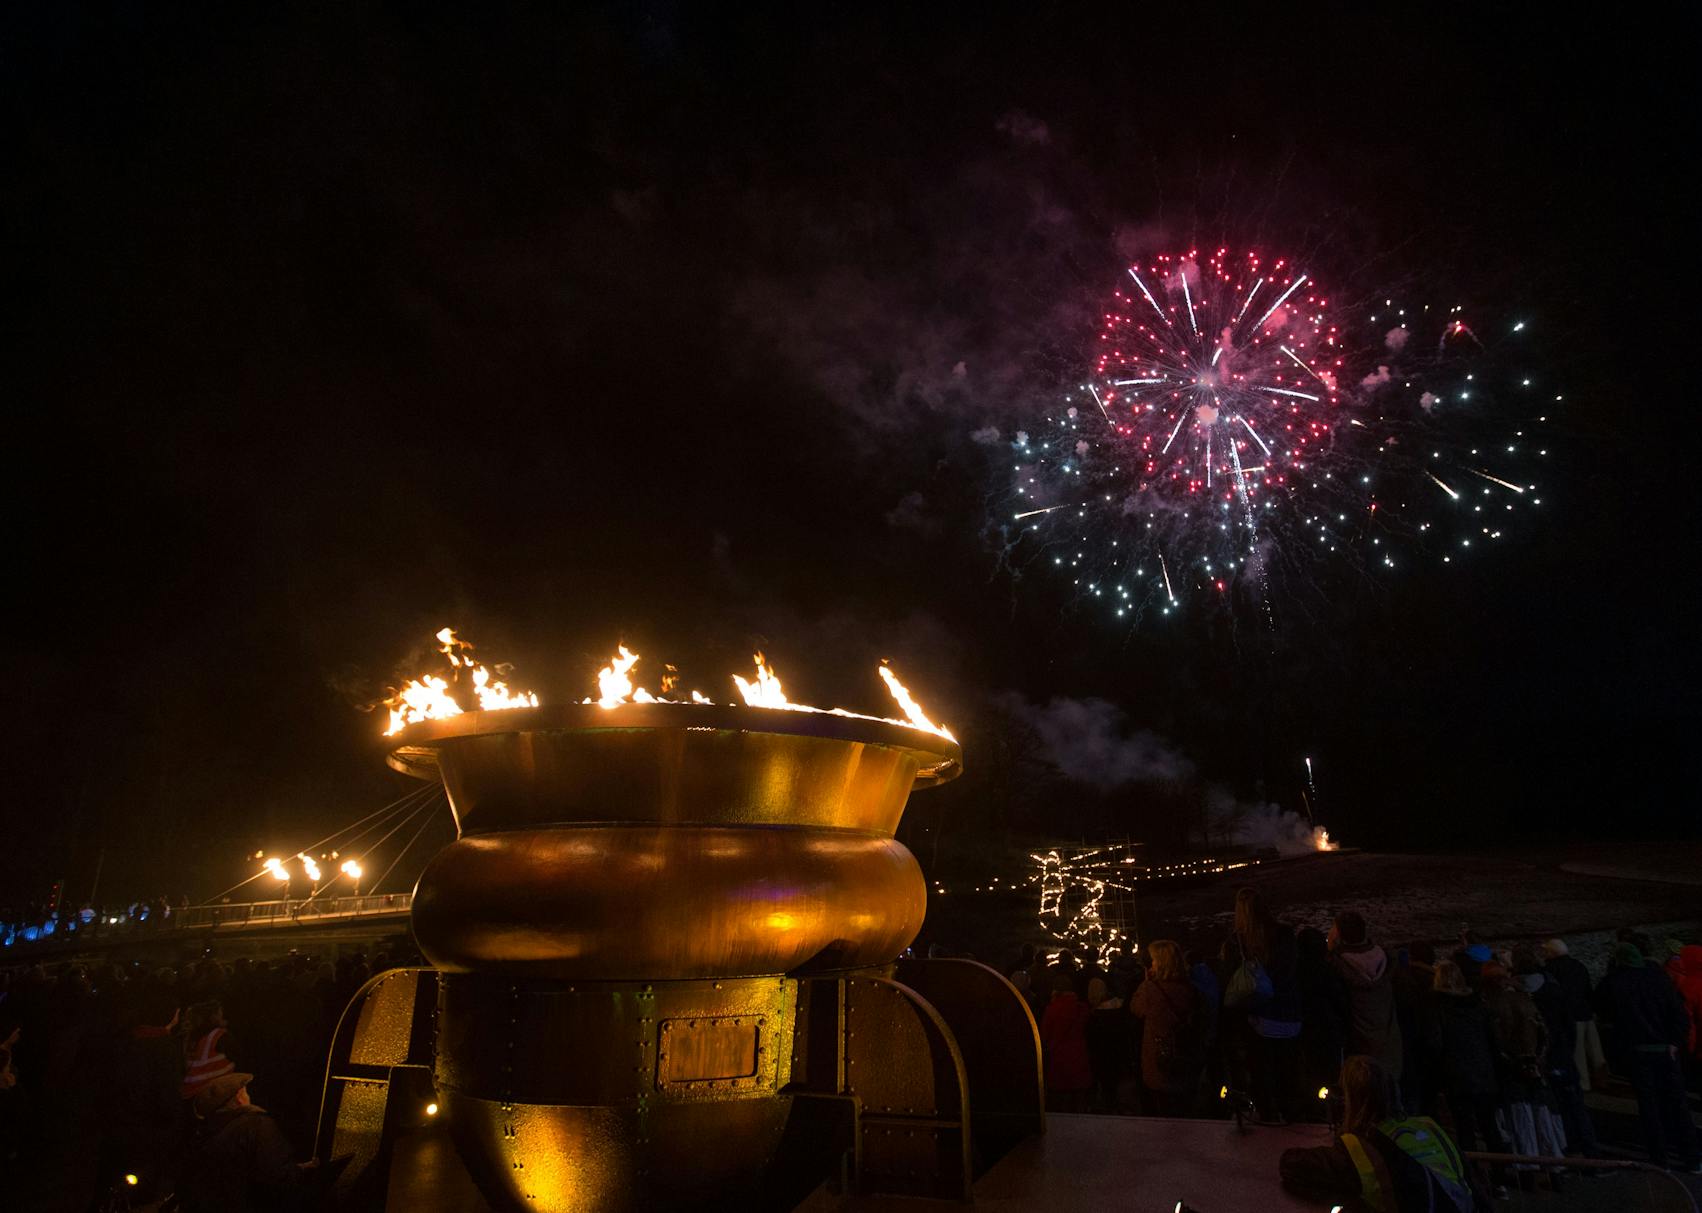 A large gold brazier with flames coming out of the top, against a night sky with fireworks